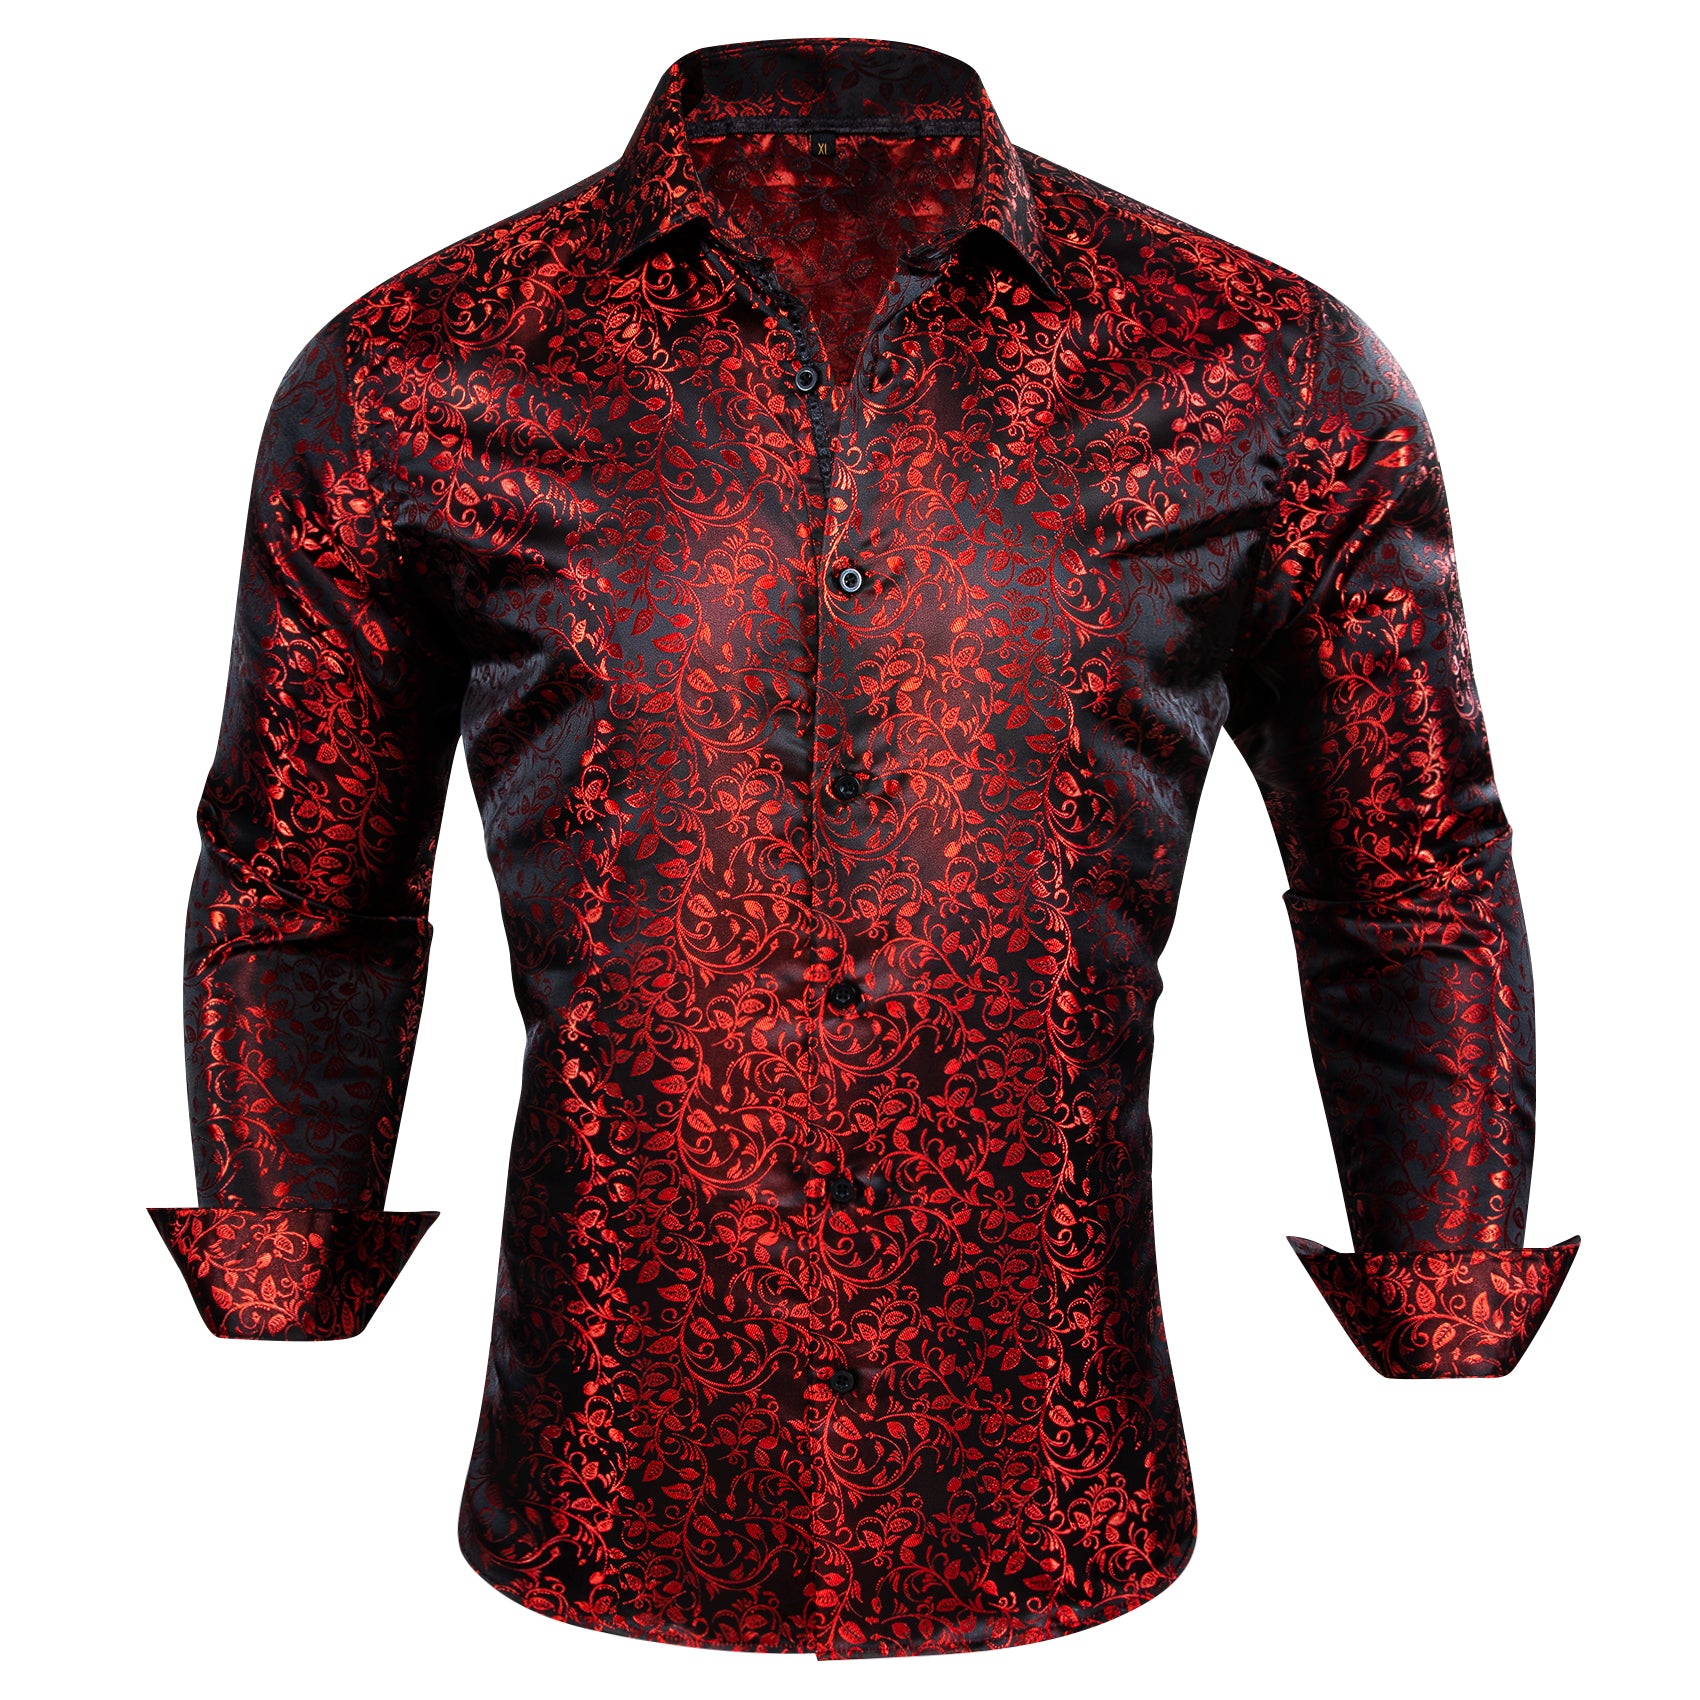 Barry.wang Button Down Shirt Burgundy Red Leaves Floral Shirt for Men